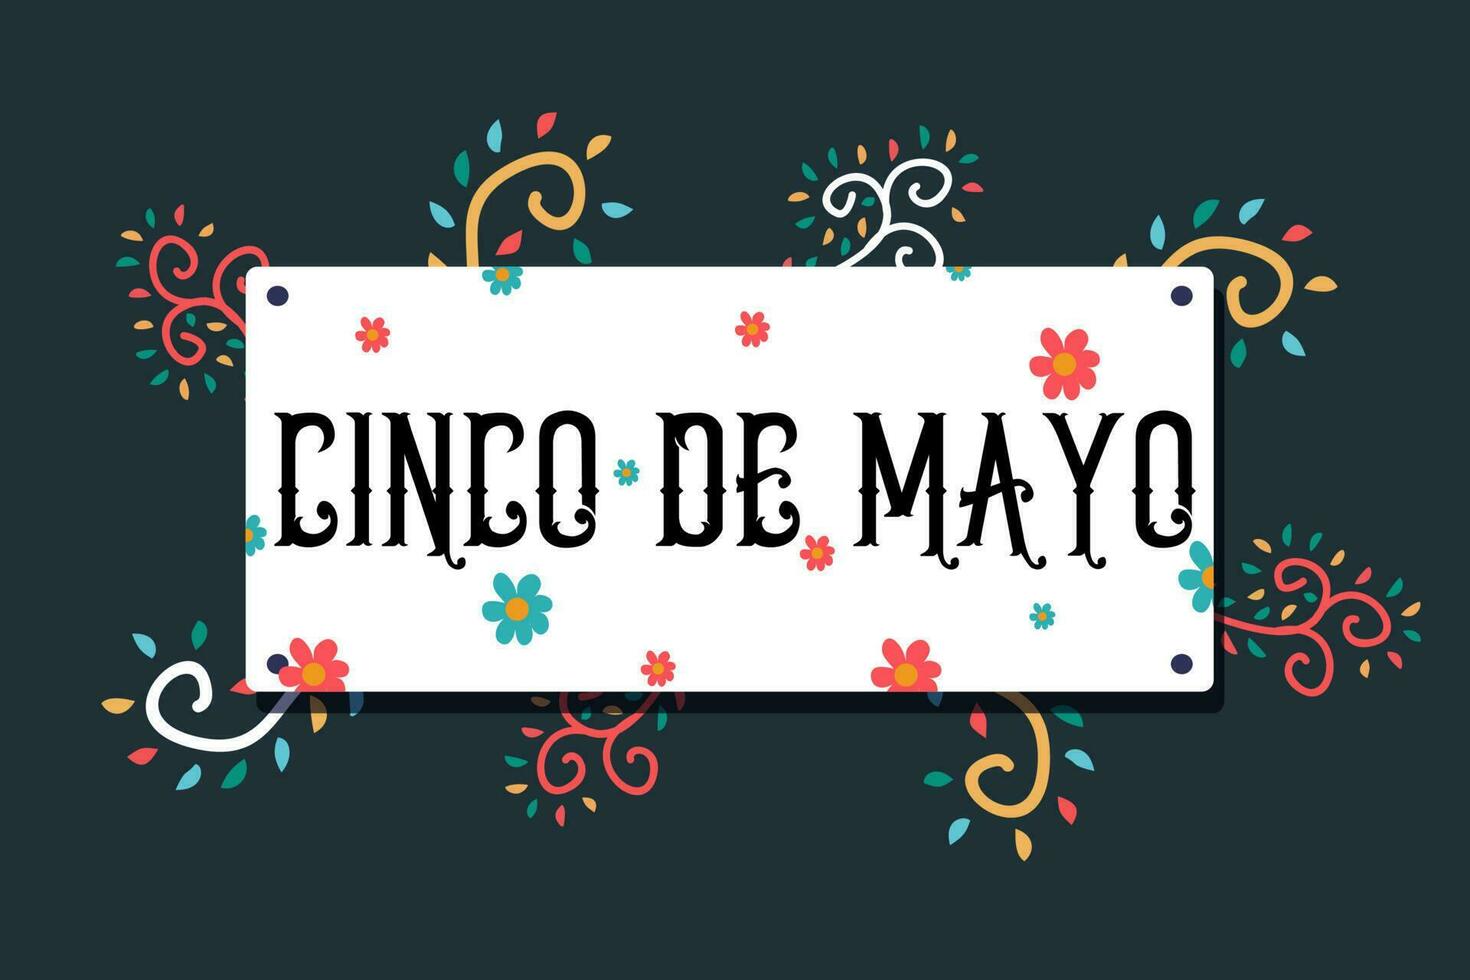 Cinco de Mayo banner template for mexico independence celebration with flags, flowers, decorations- May 5, federal holiday in Mexico. Fiesta banner and poster design. vector